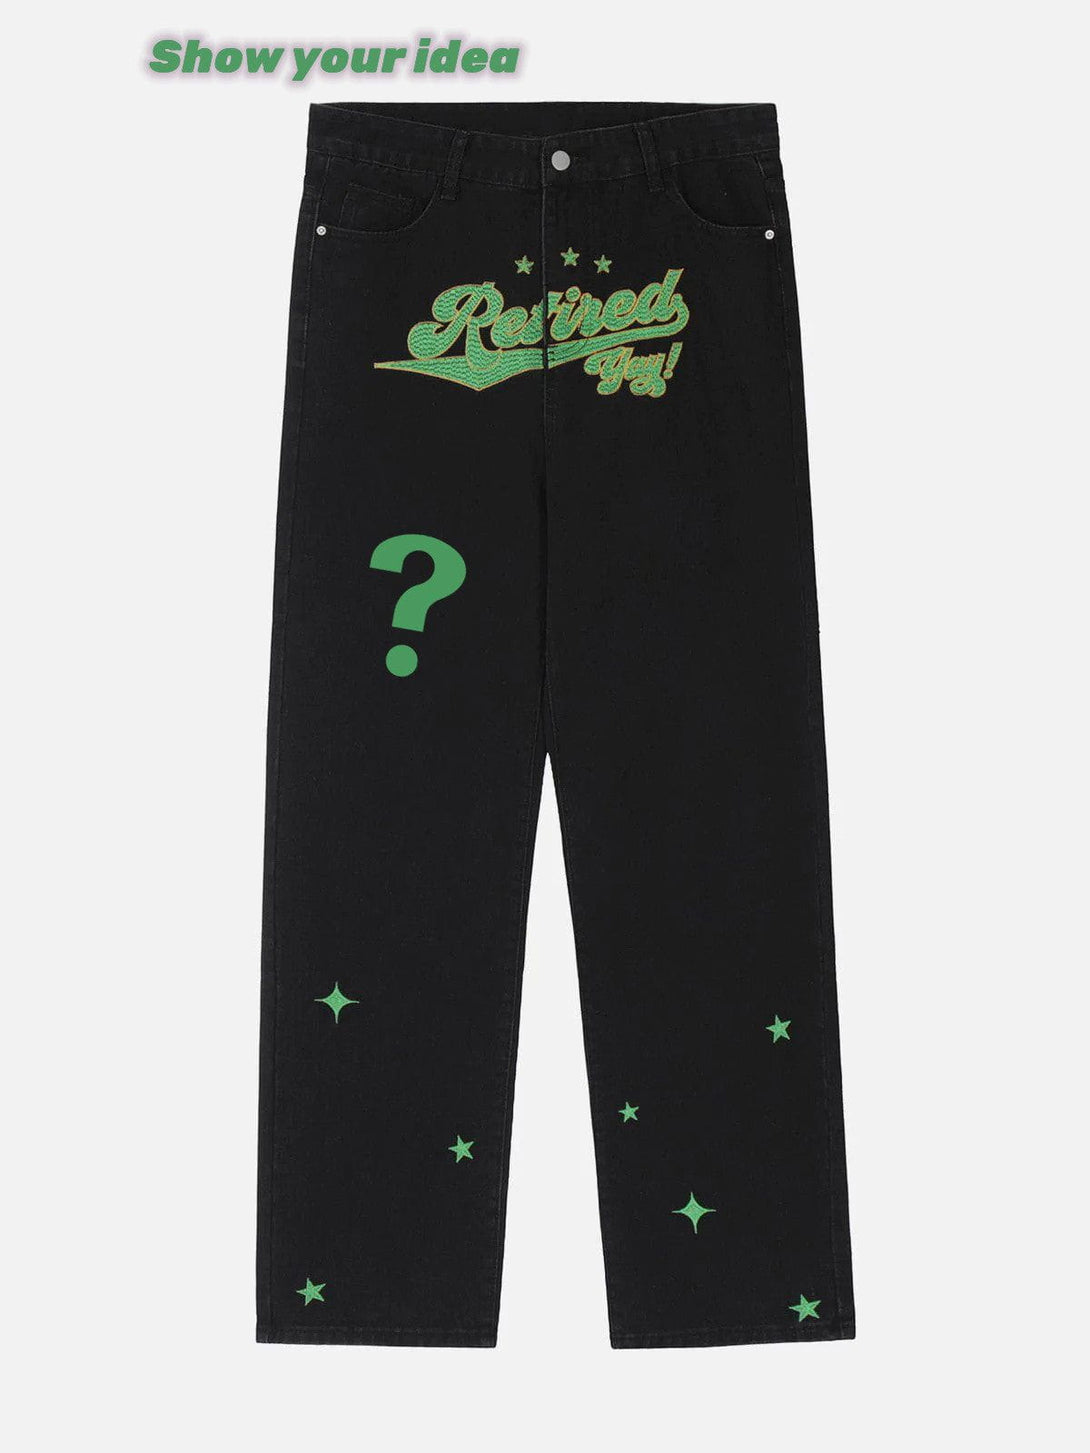 Majesda® - Star Graphic Pants outfit ideas streetwear fashion